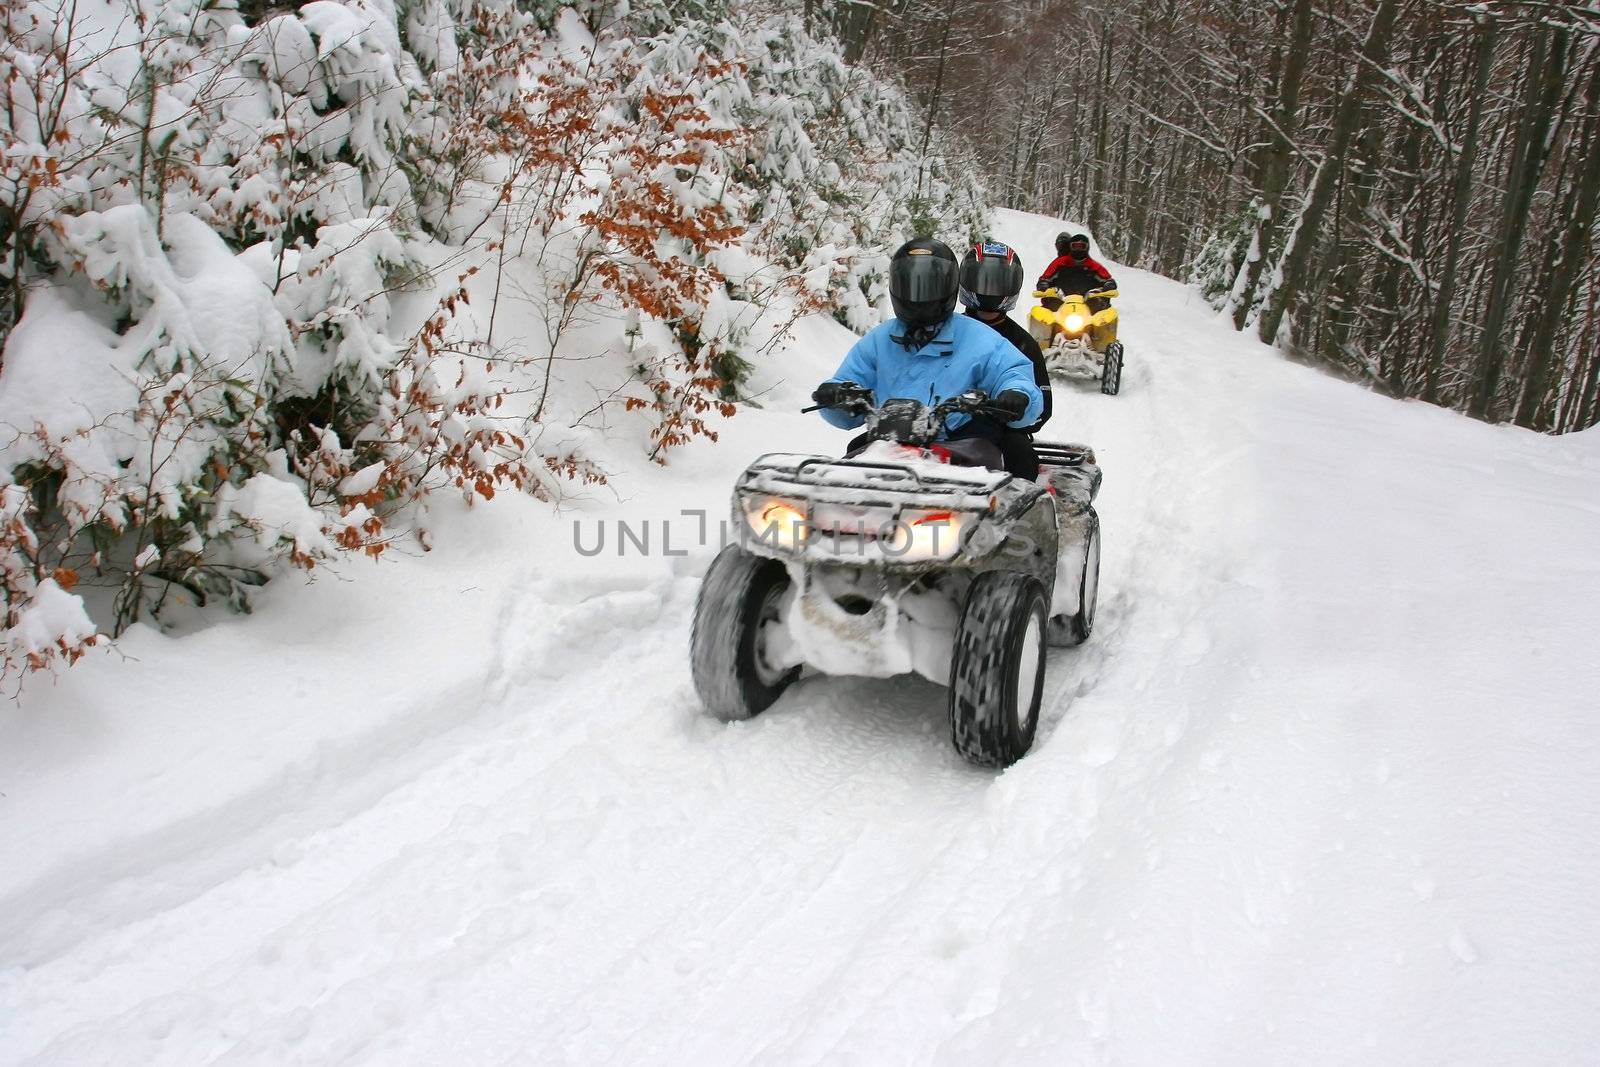 Riding with an All Terrain Vehicle on snow